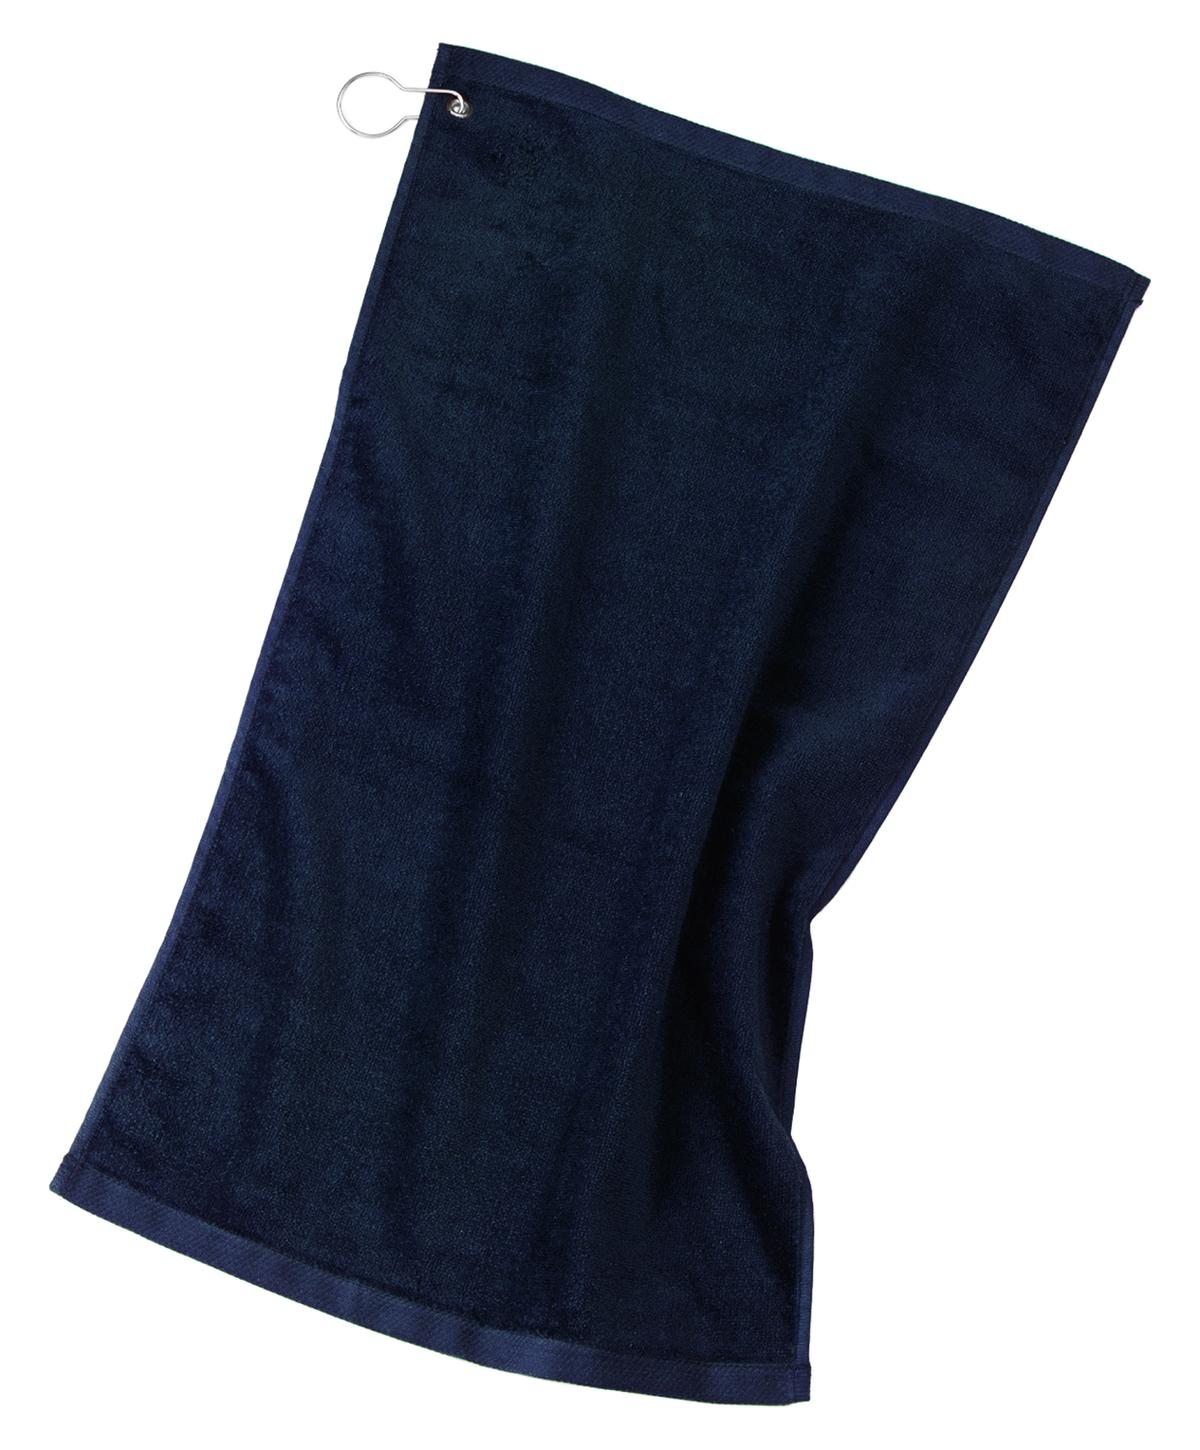 Port Authority Grommeted Golf Towel. TW51